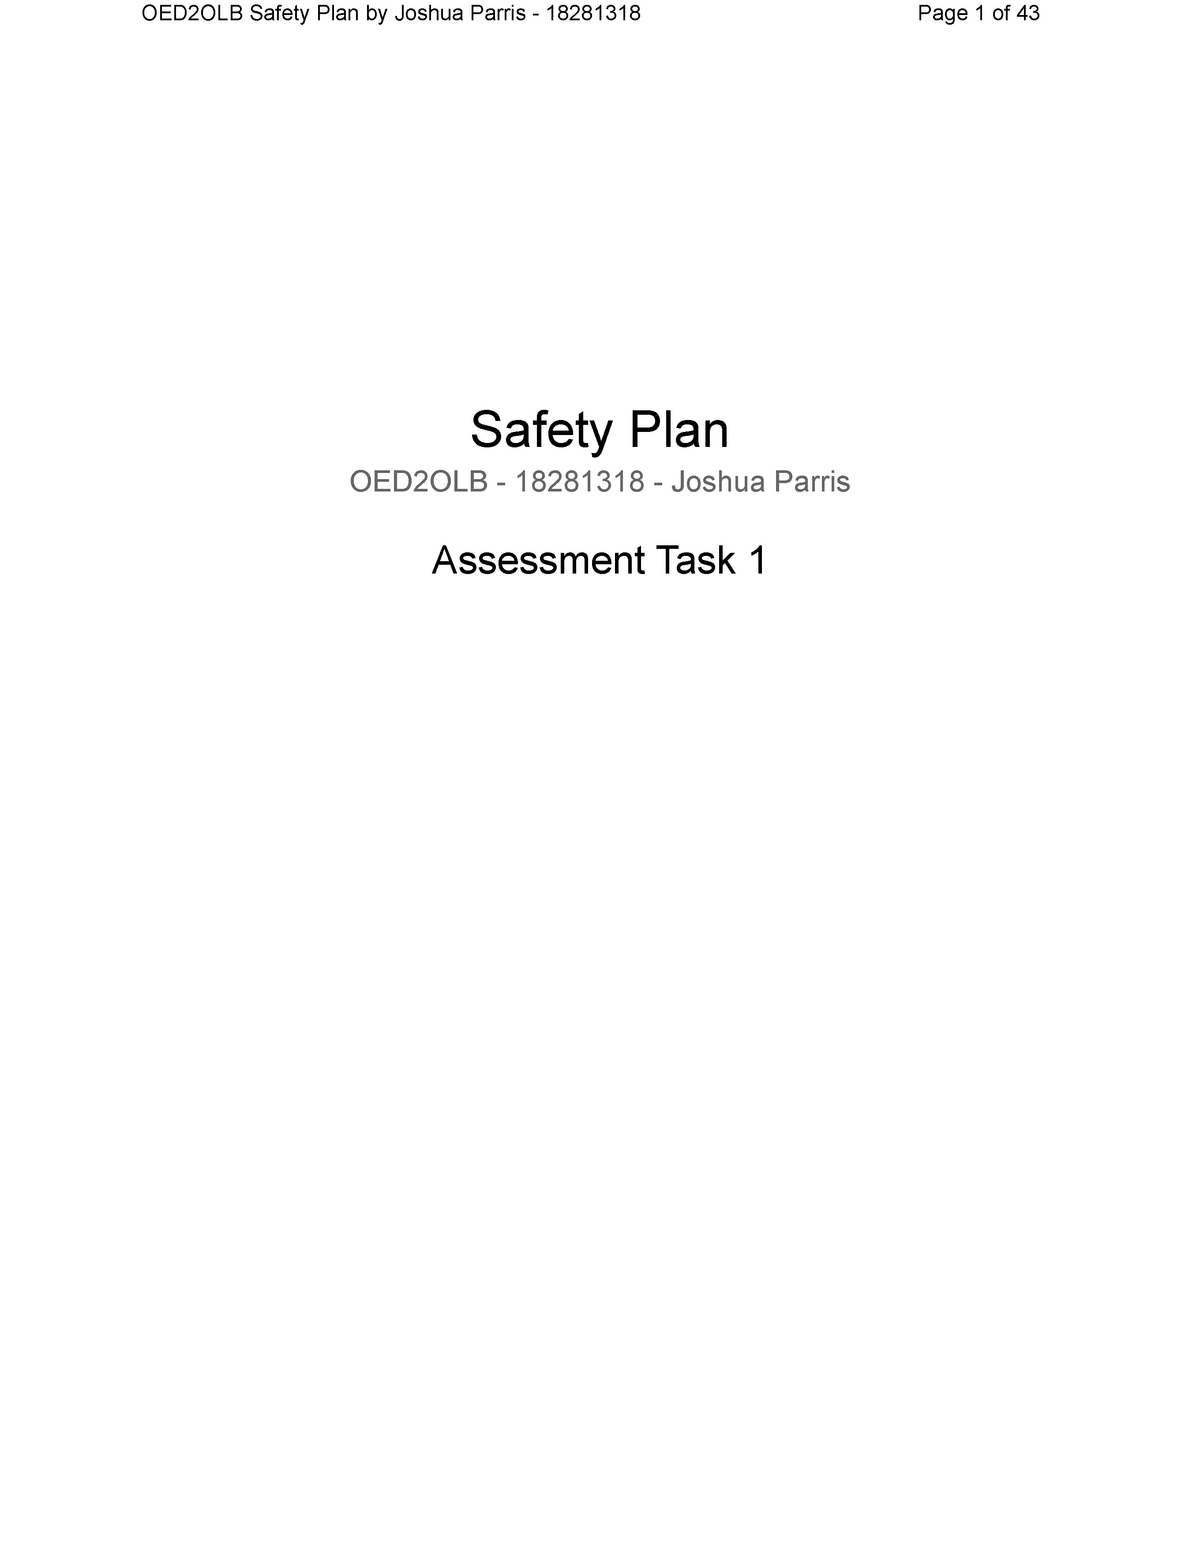 assignment 1.safety